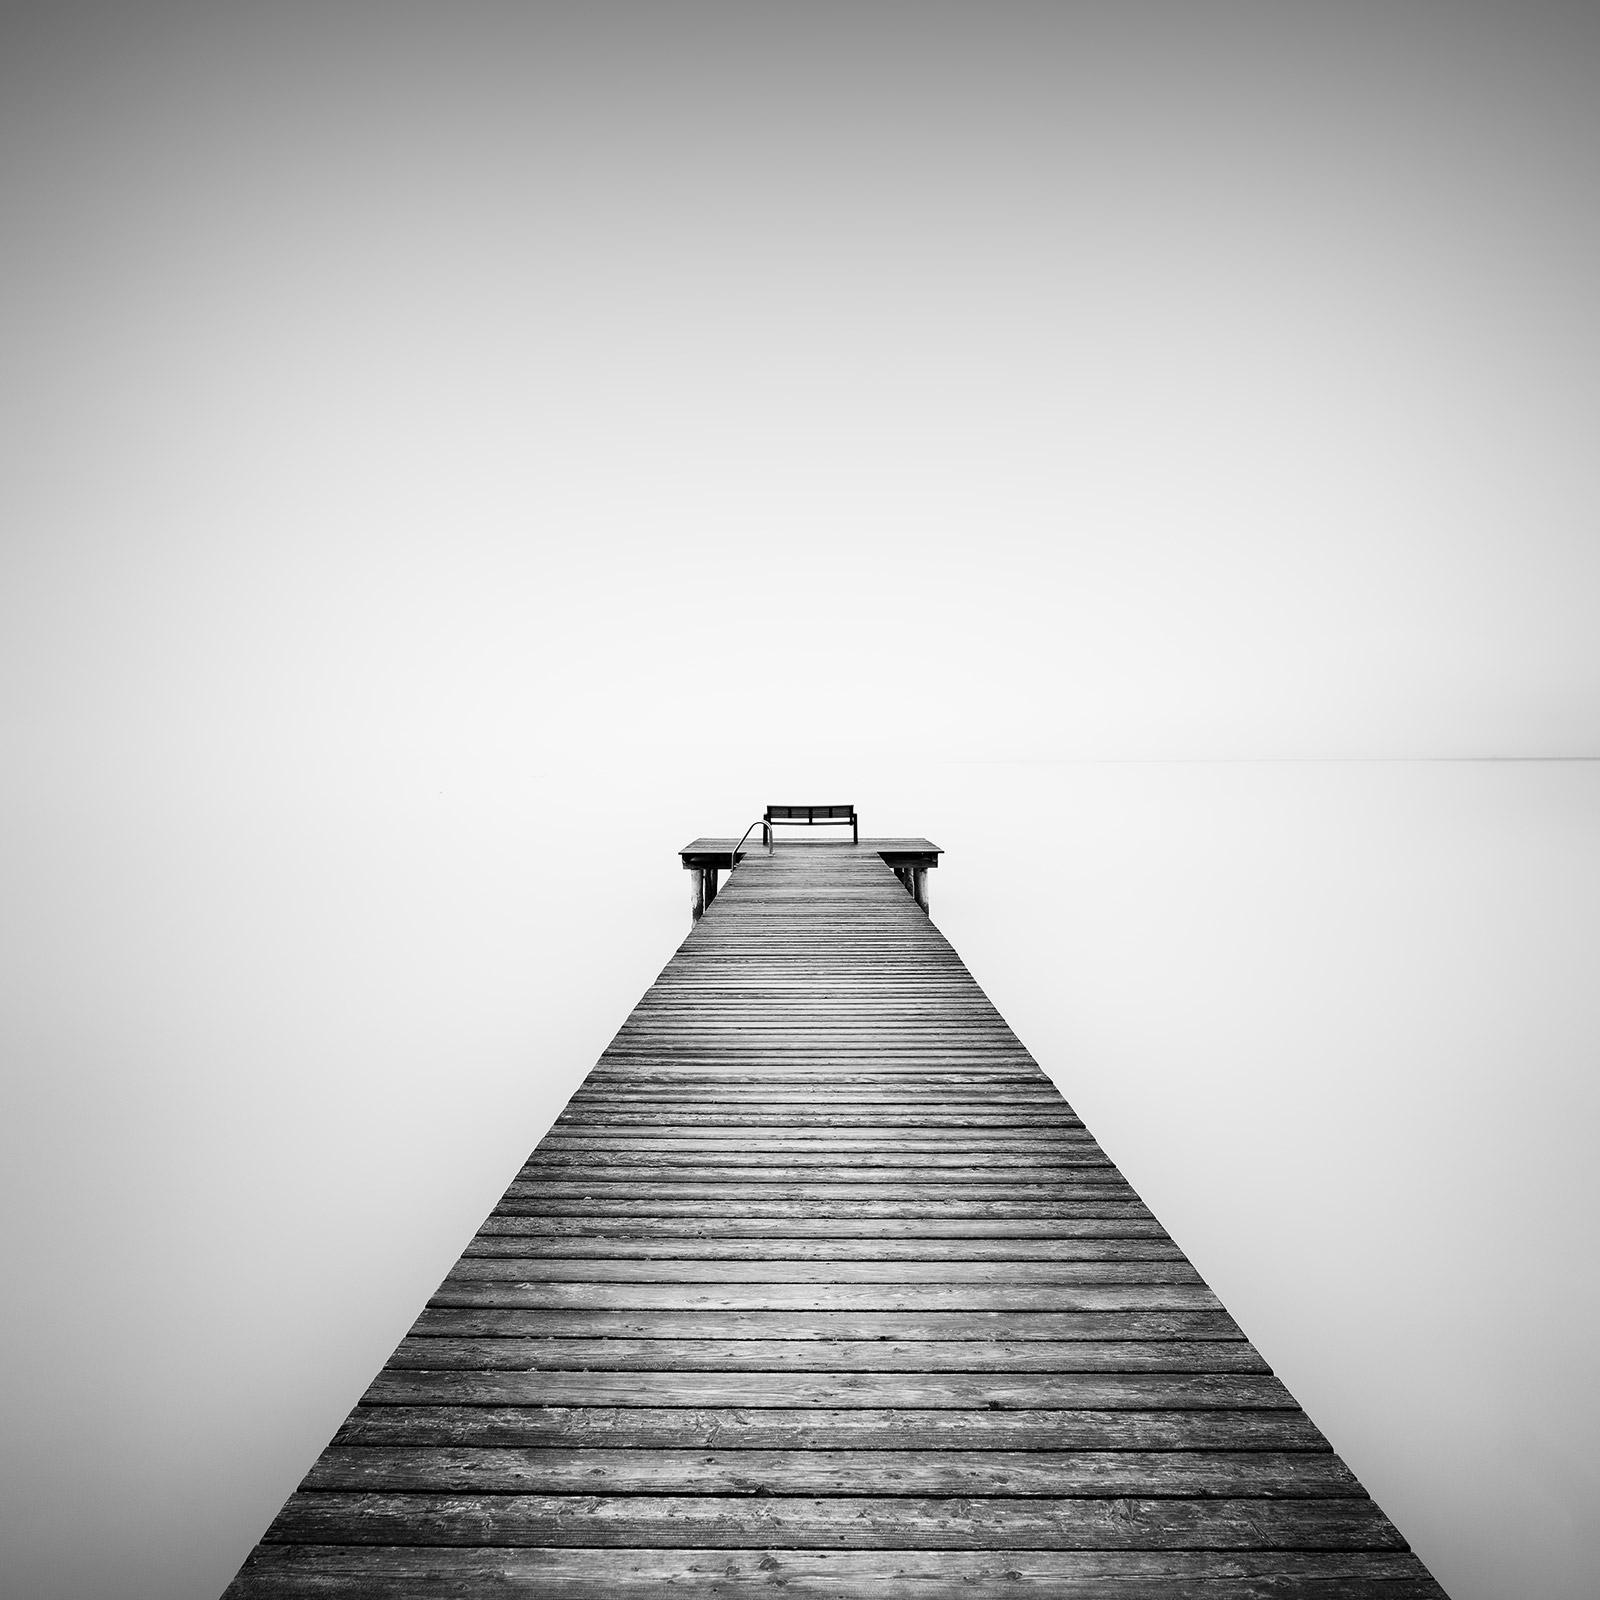 Gerald Berghammer Landscape Photograph - Misty Morning at the Lake, black and white long exposure landscape photography